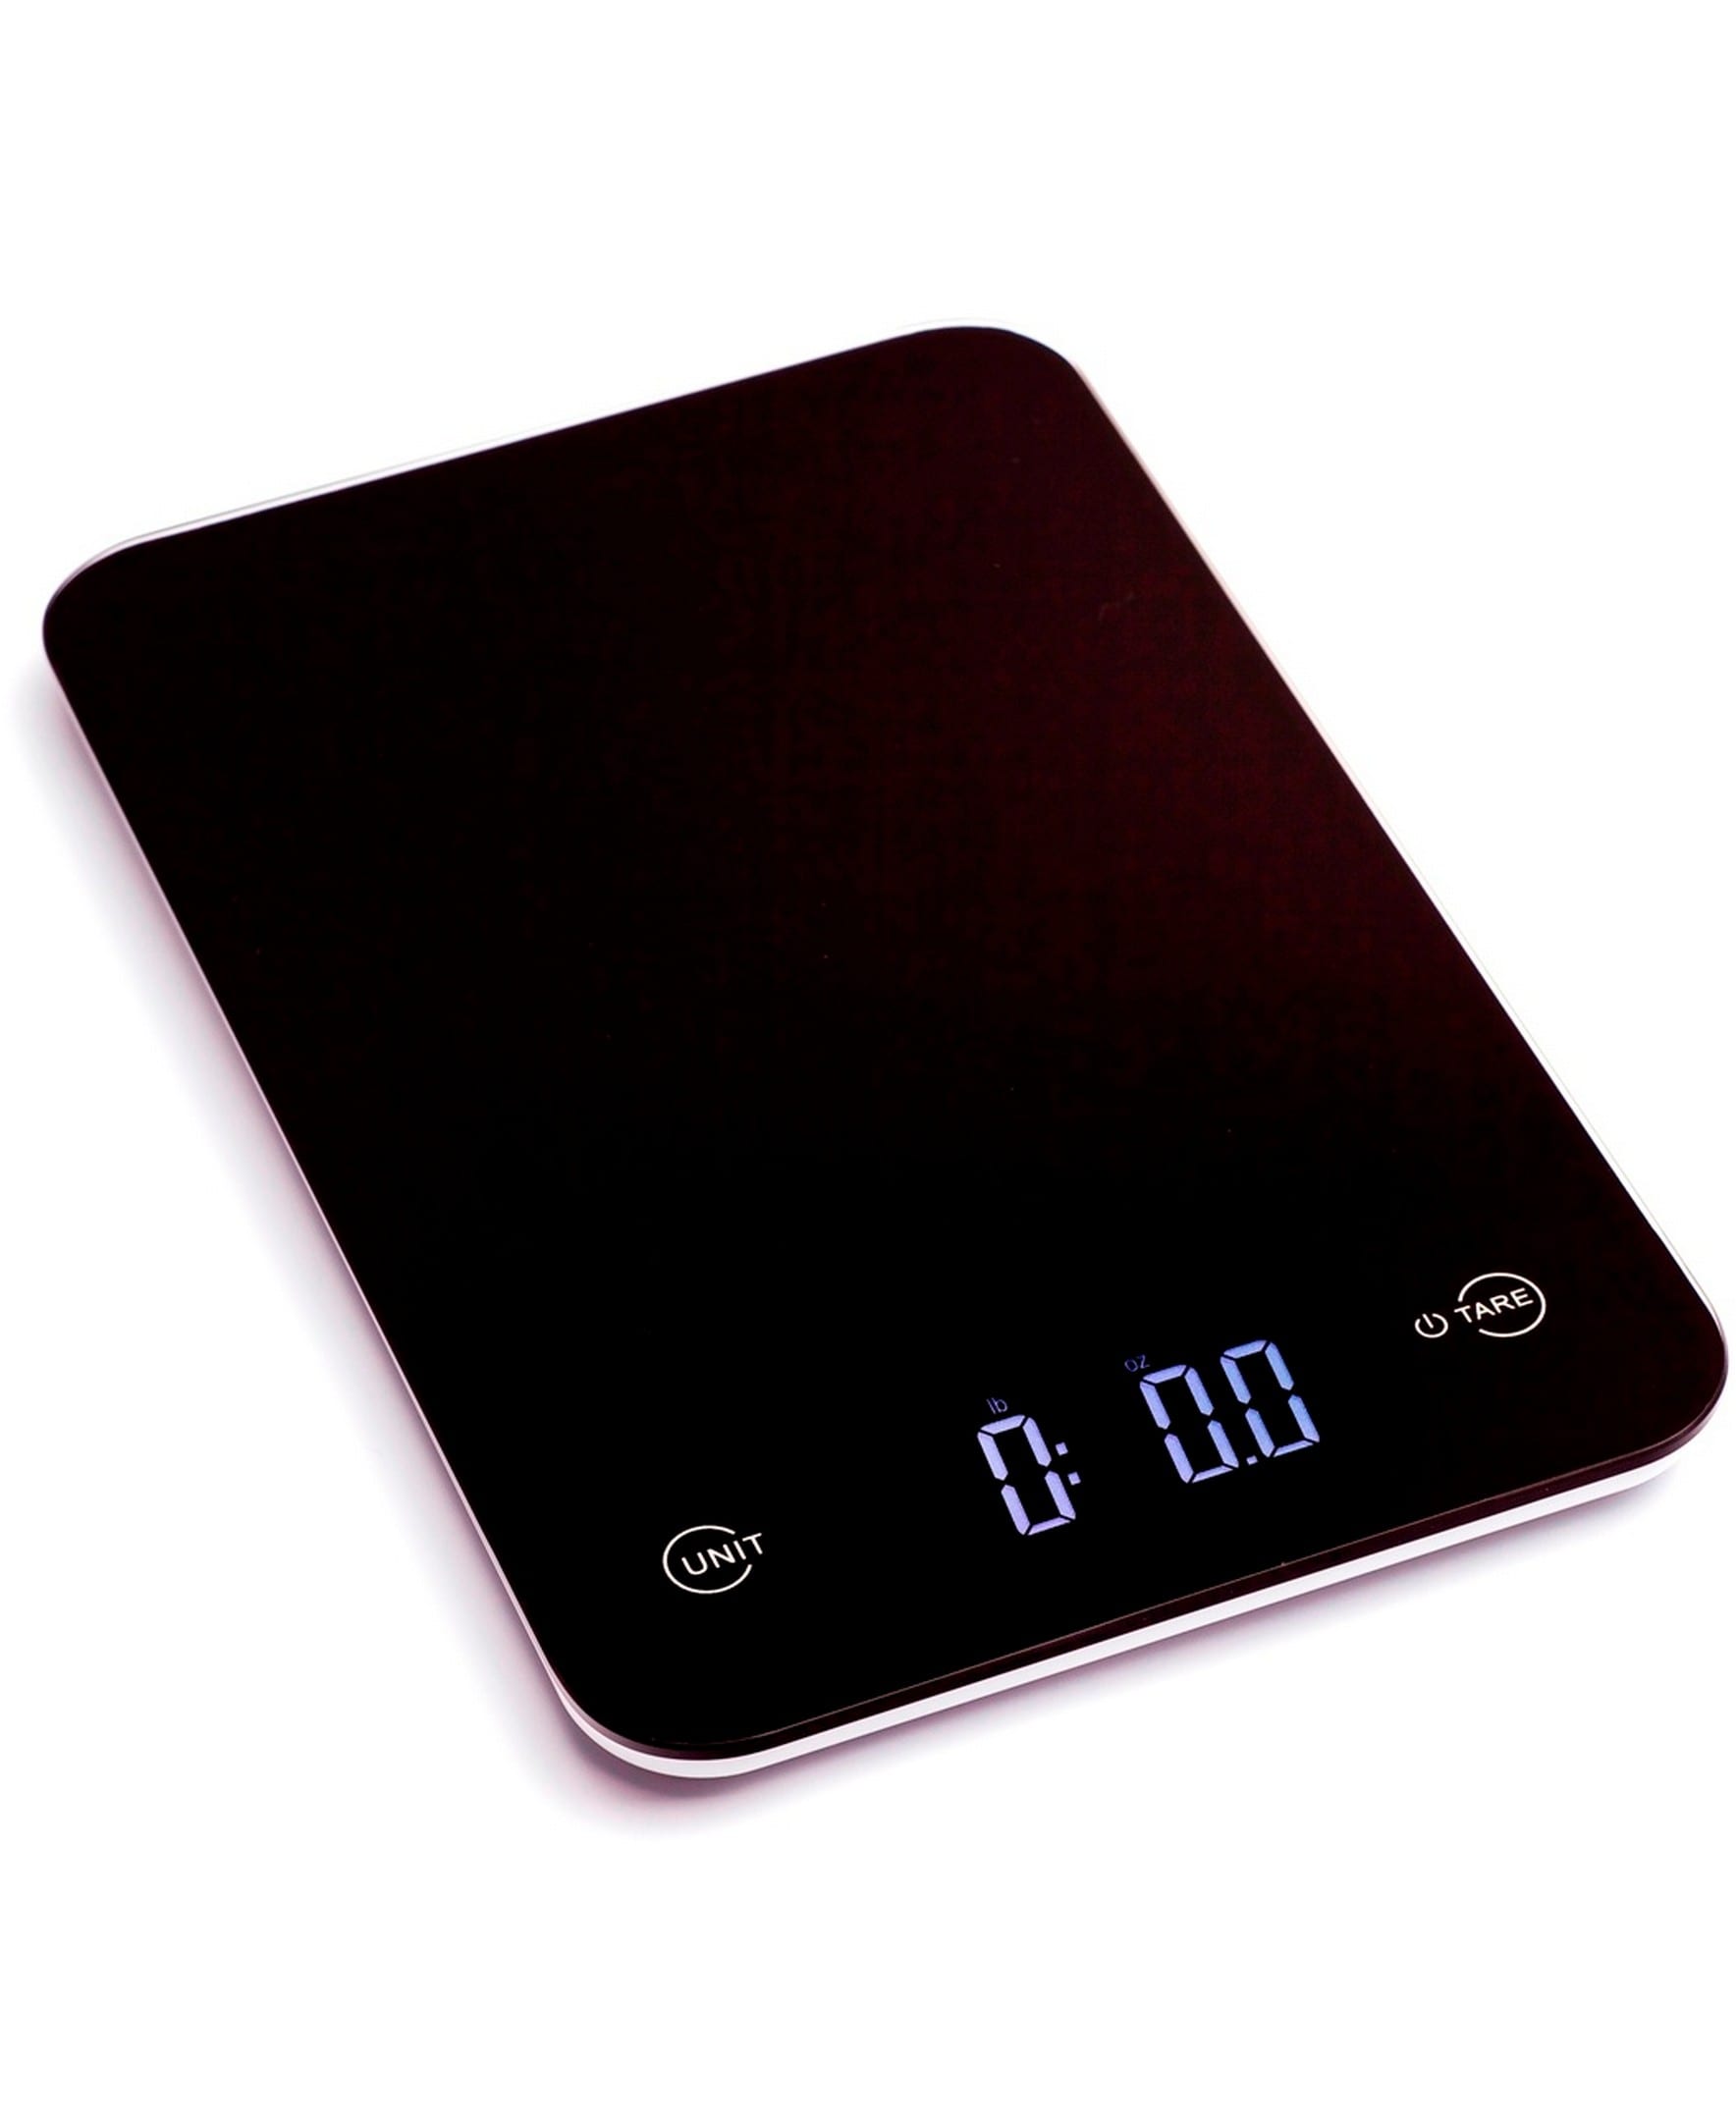 Ozeri Zenith Digital Kitchen Scale in Refined Stainless Steel with Fingerprint Resistant Coating